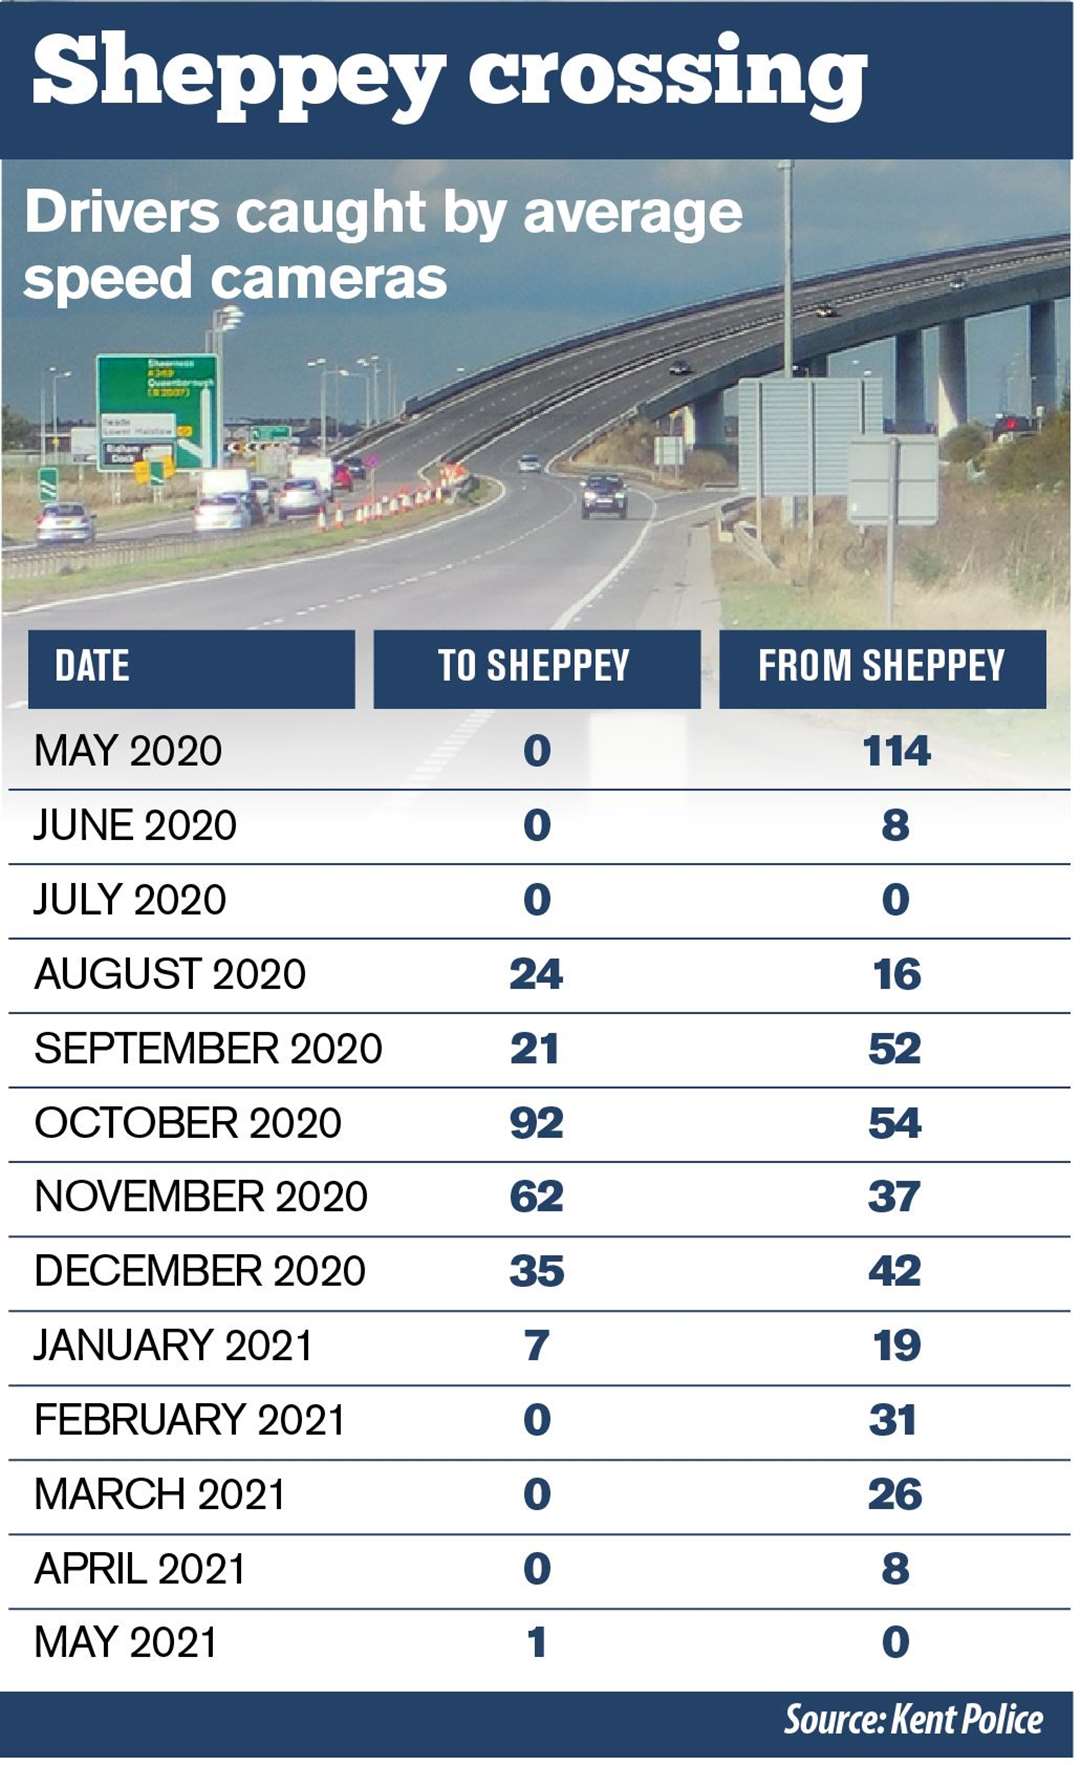 Figures show that most drivers were caught doing above 70mph on the Sheppey crossing in October 2020, shortly before the second national lockdown